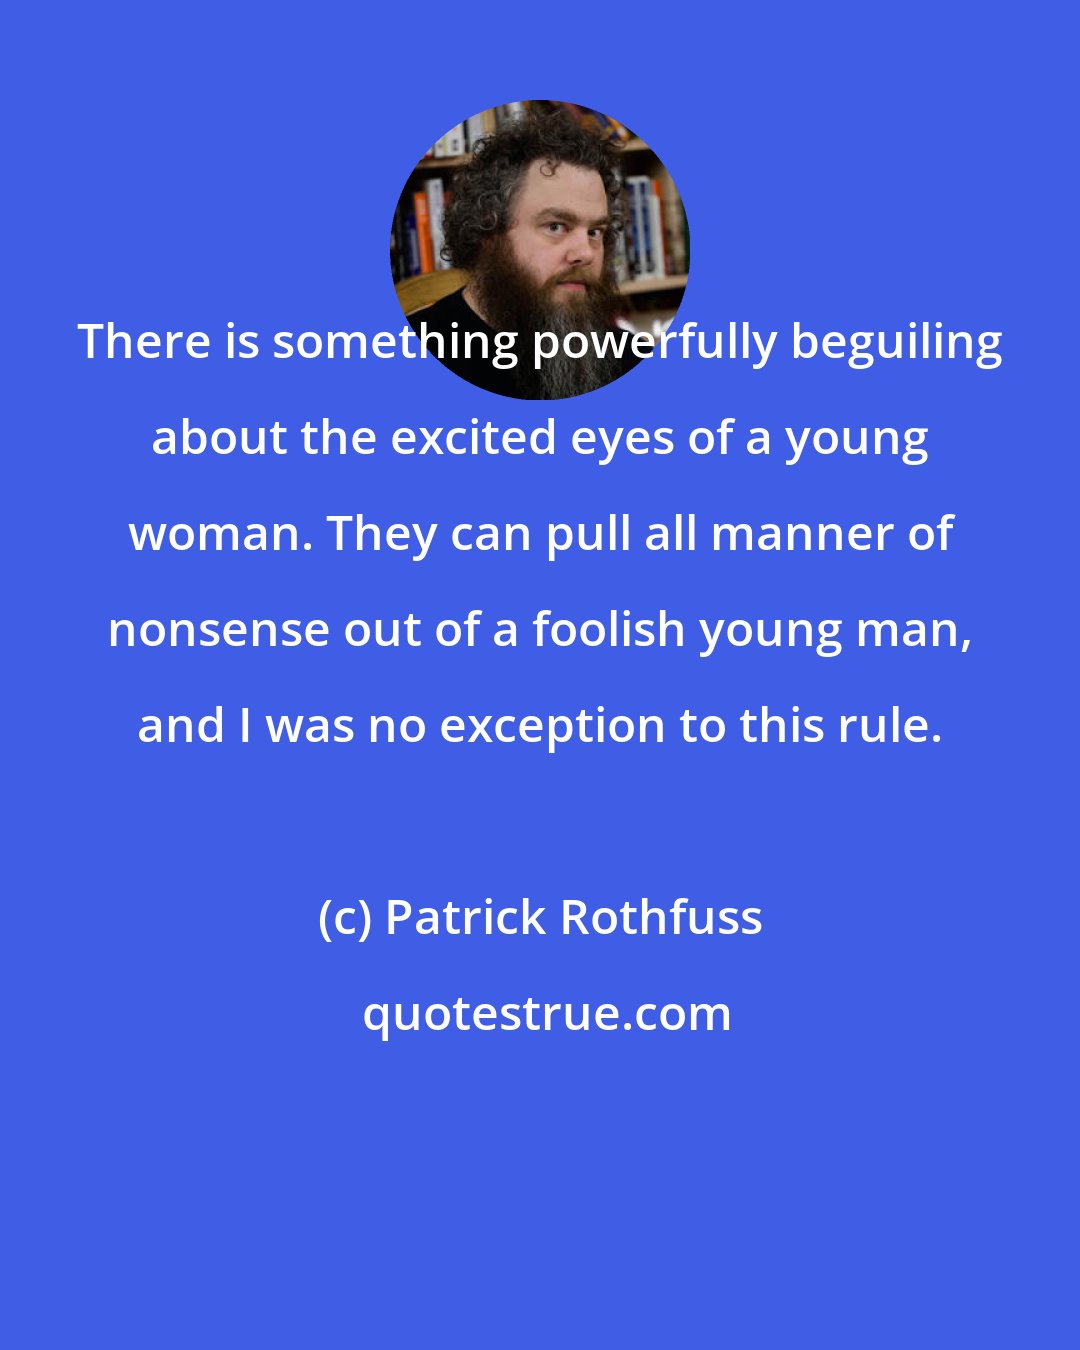 Patrick Rothfuss: There is something powerfully beguiling about the excited eyes of a young woman. They can pull all manner of nonsense out of a foolish young man, and I was no exception to this rule.